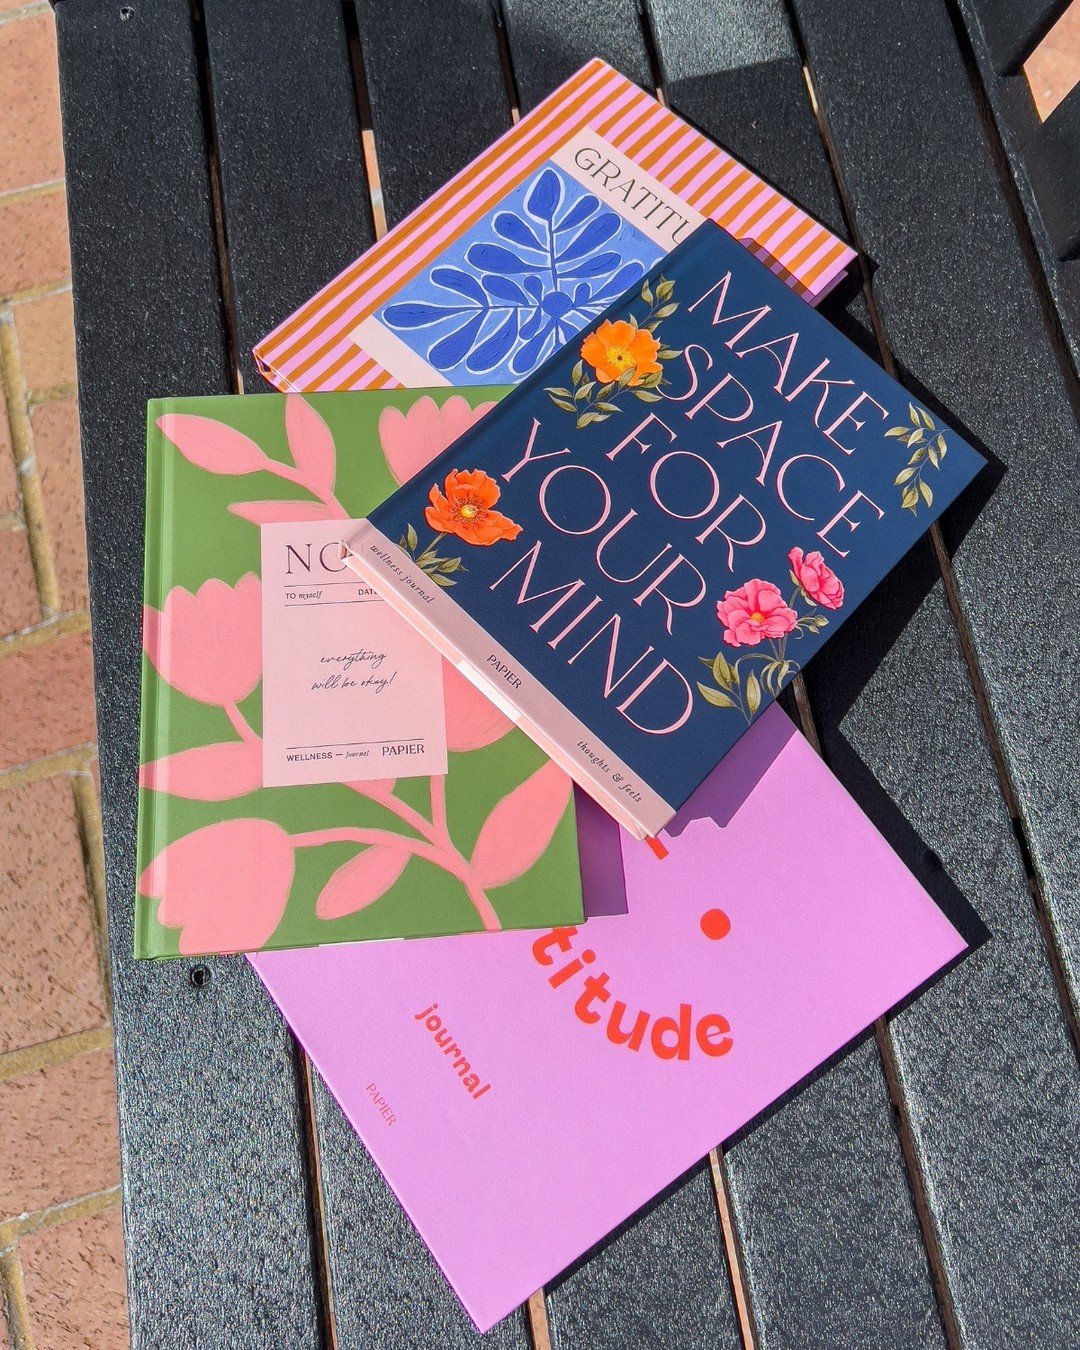 Looking to spruce up your workspace? ✨ Our new @papier notebooks are here to help! From cultivating gratitude to capturing culinary inspiration, they're the perfect desk-side companion! 📝💖